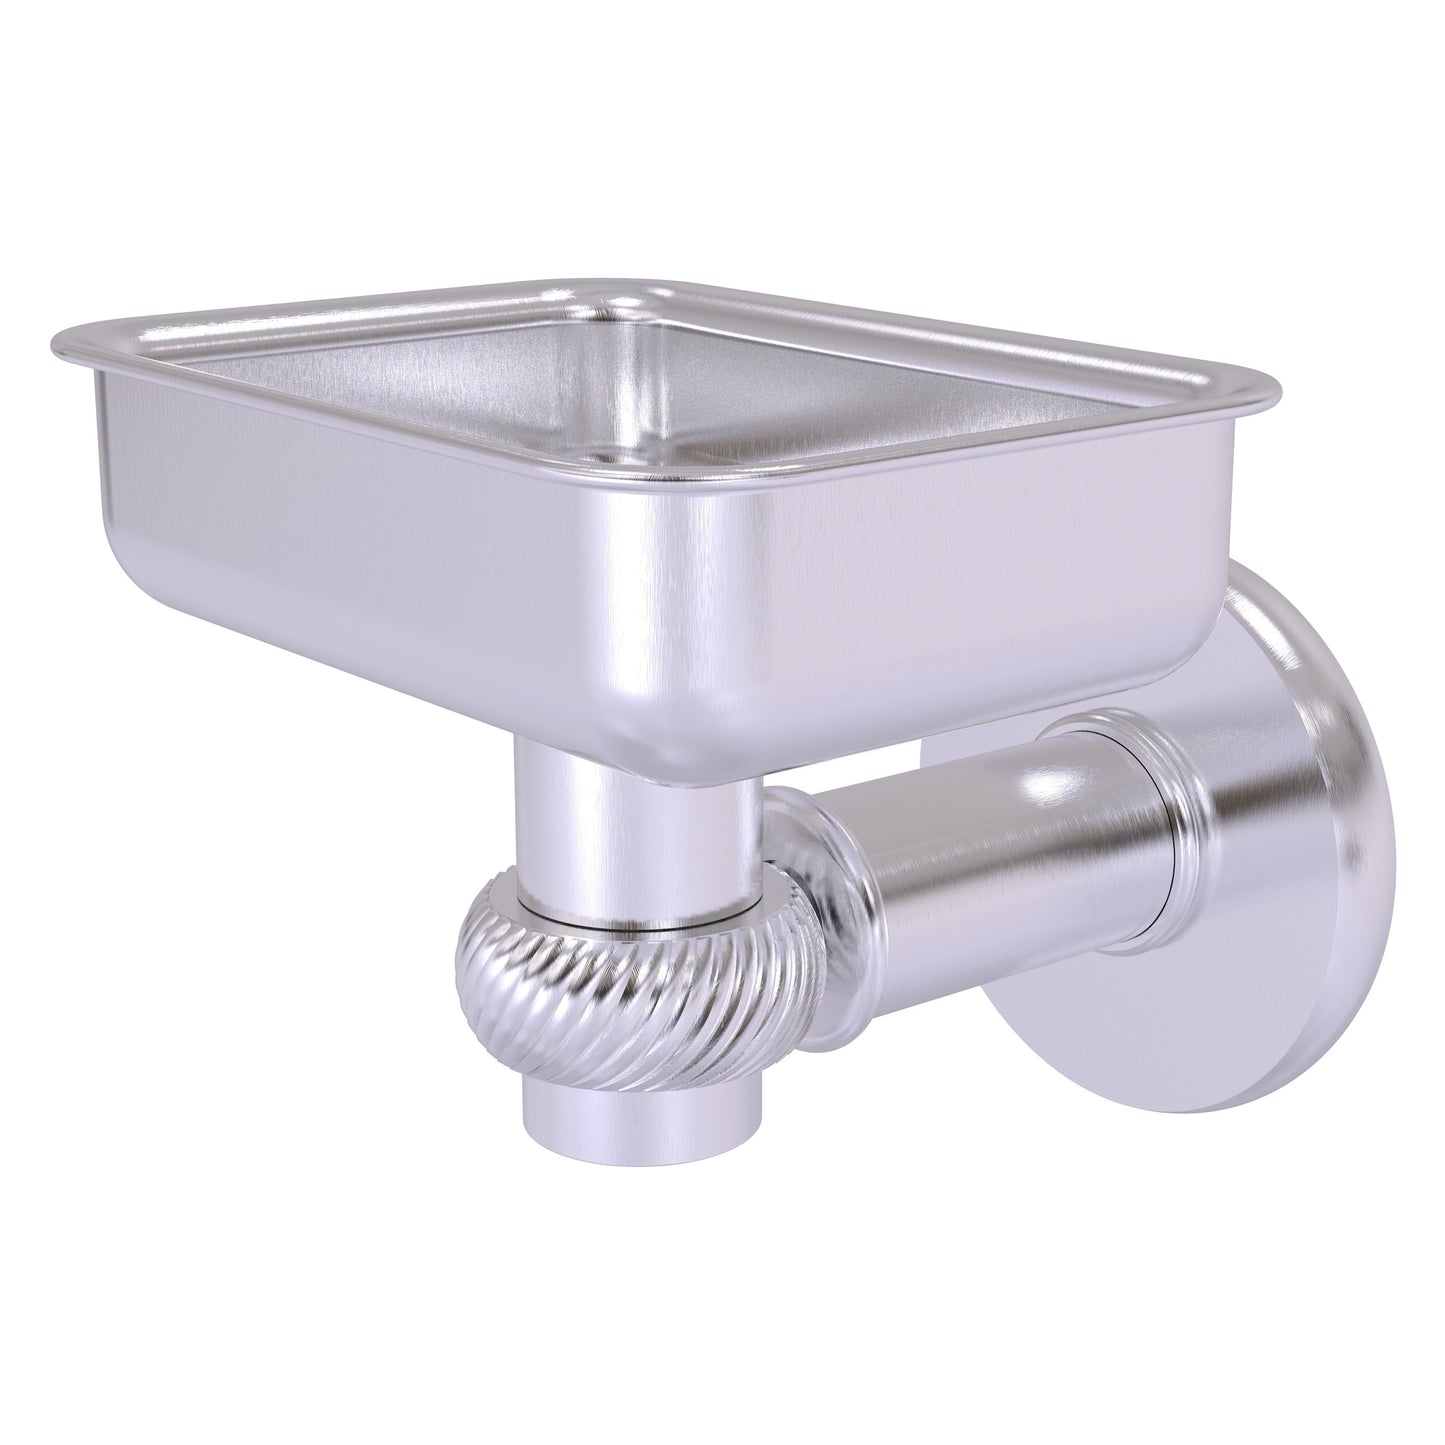 Allied Brass Continental 4.5" x 3.5" Satin Chrome Solid Brass Wall-Mounted Soap Dish Holder with Twist Accents